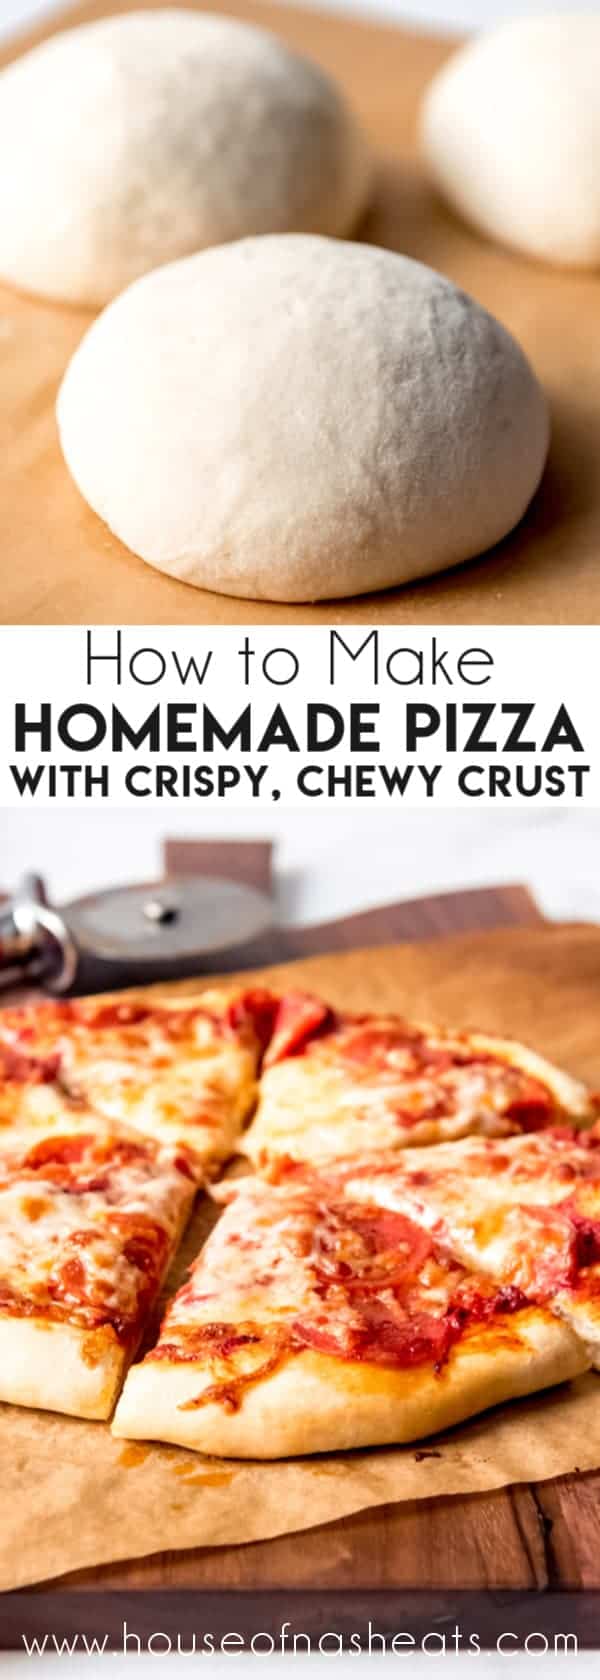 How to Make Pizza at Home - Easy Homemade Pizza Recipe